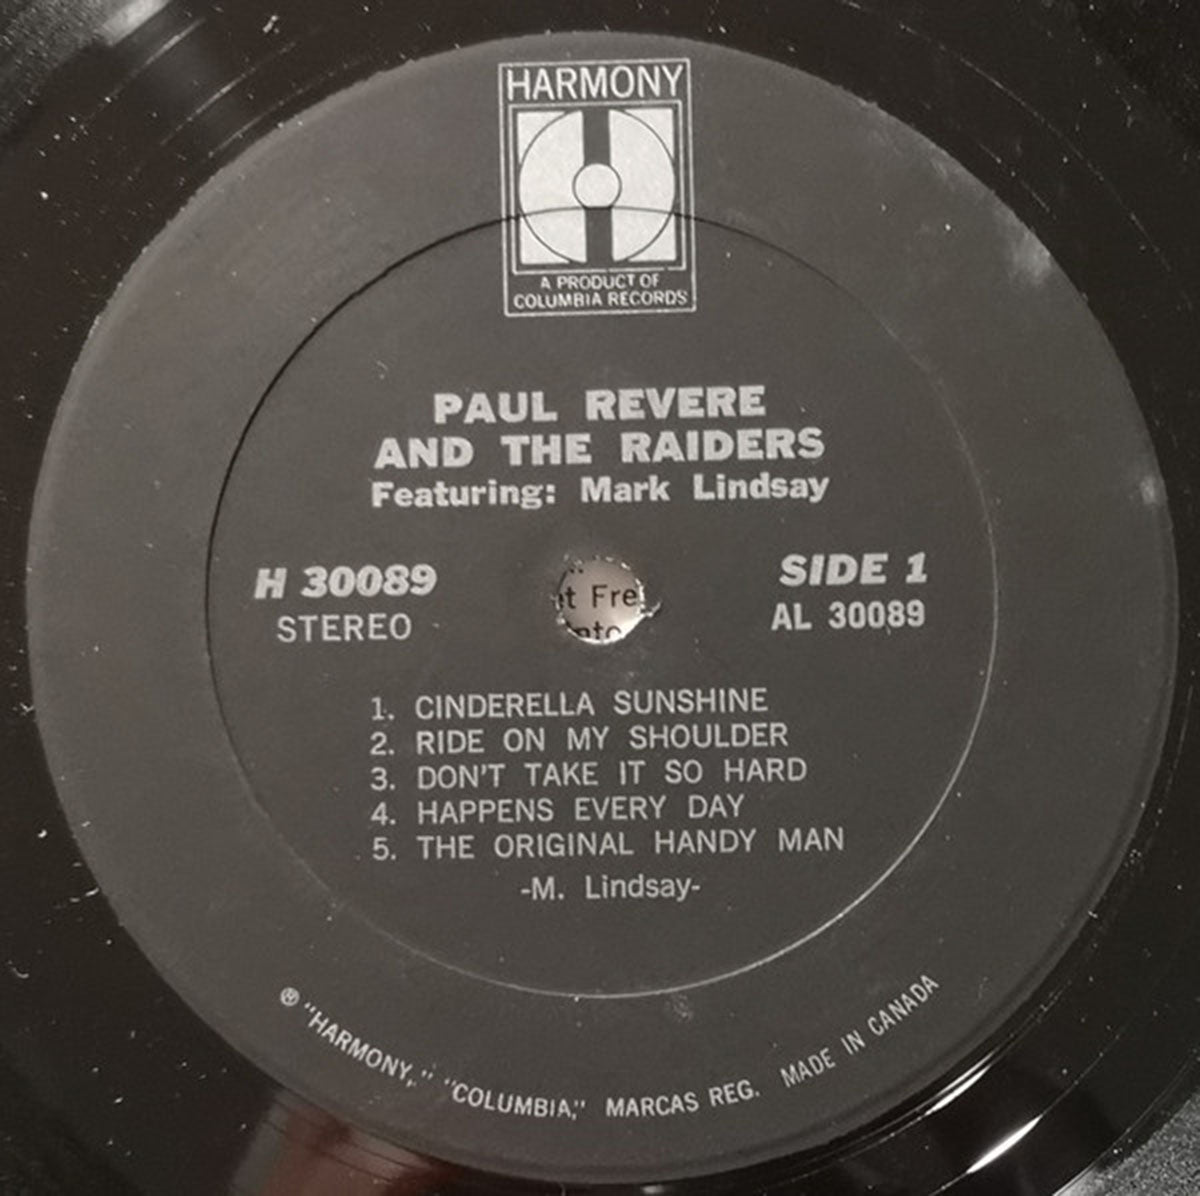 Paul Revere And The Raiders Featuring Mark Lindsay